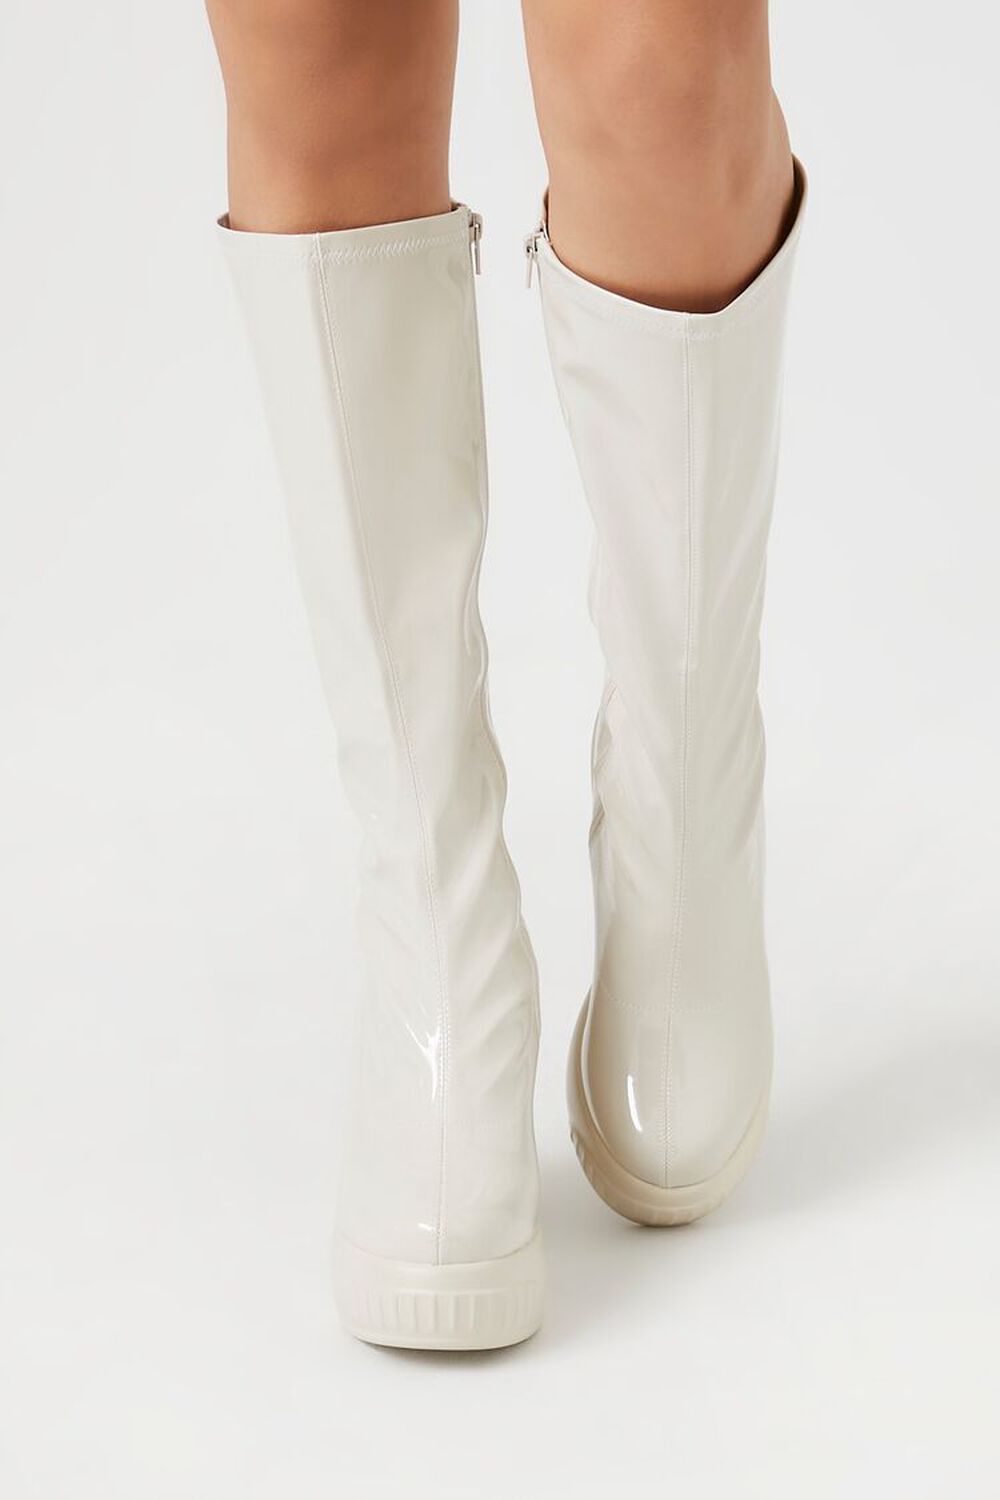 White Knee High Boots in Patent